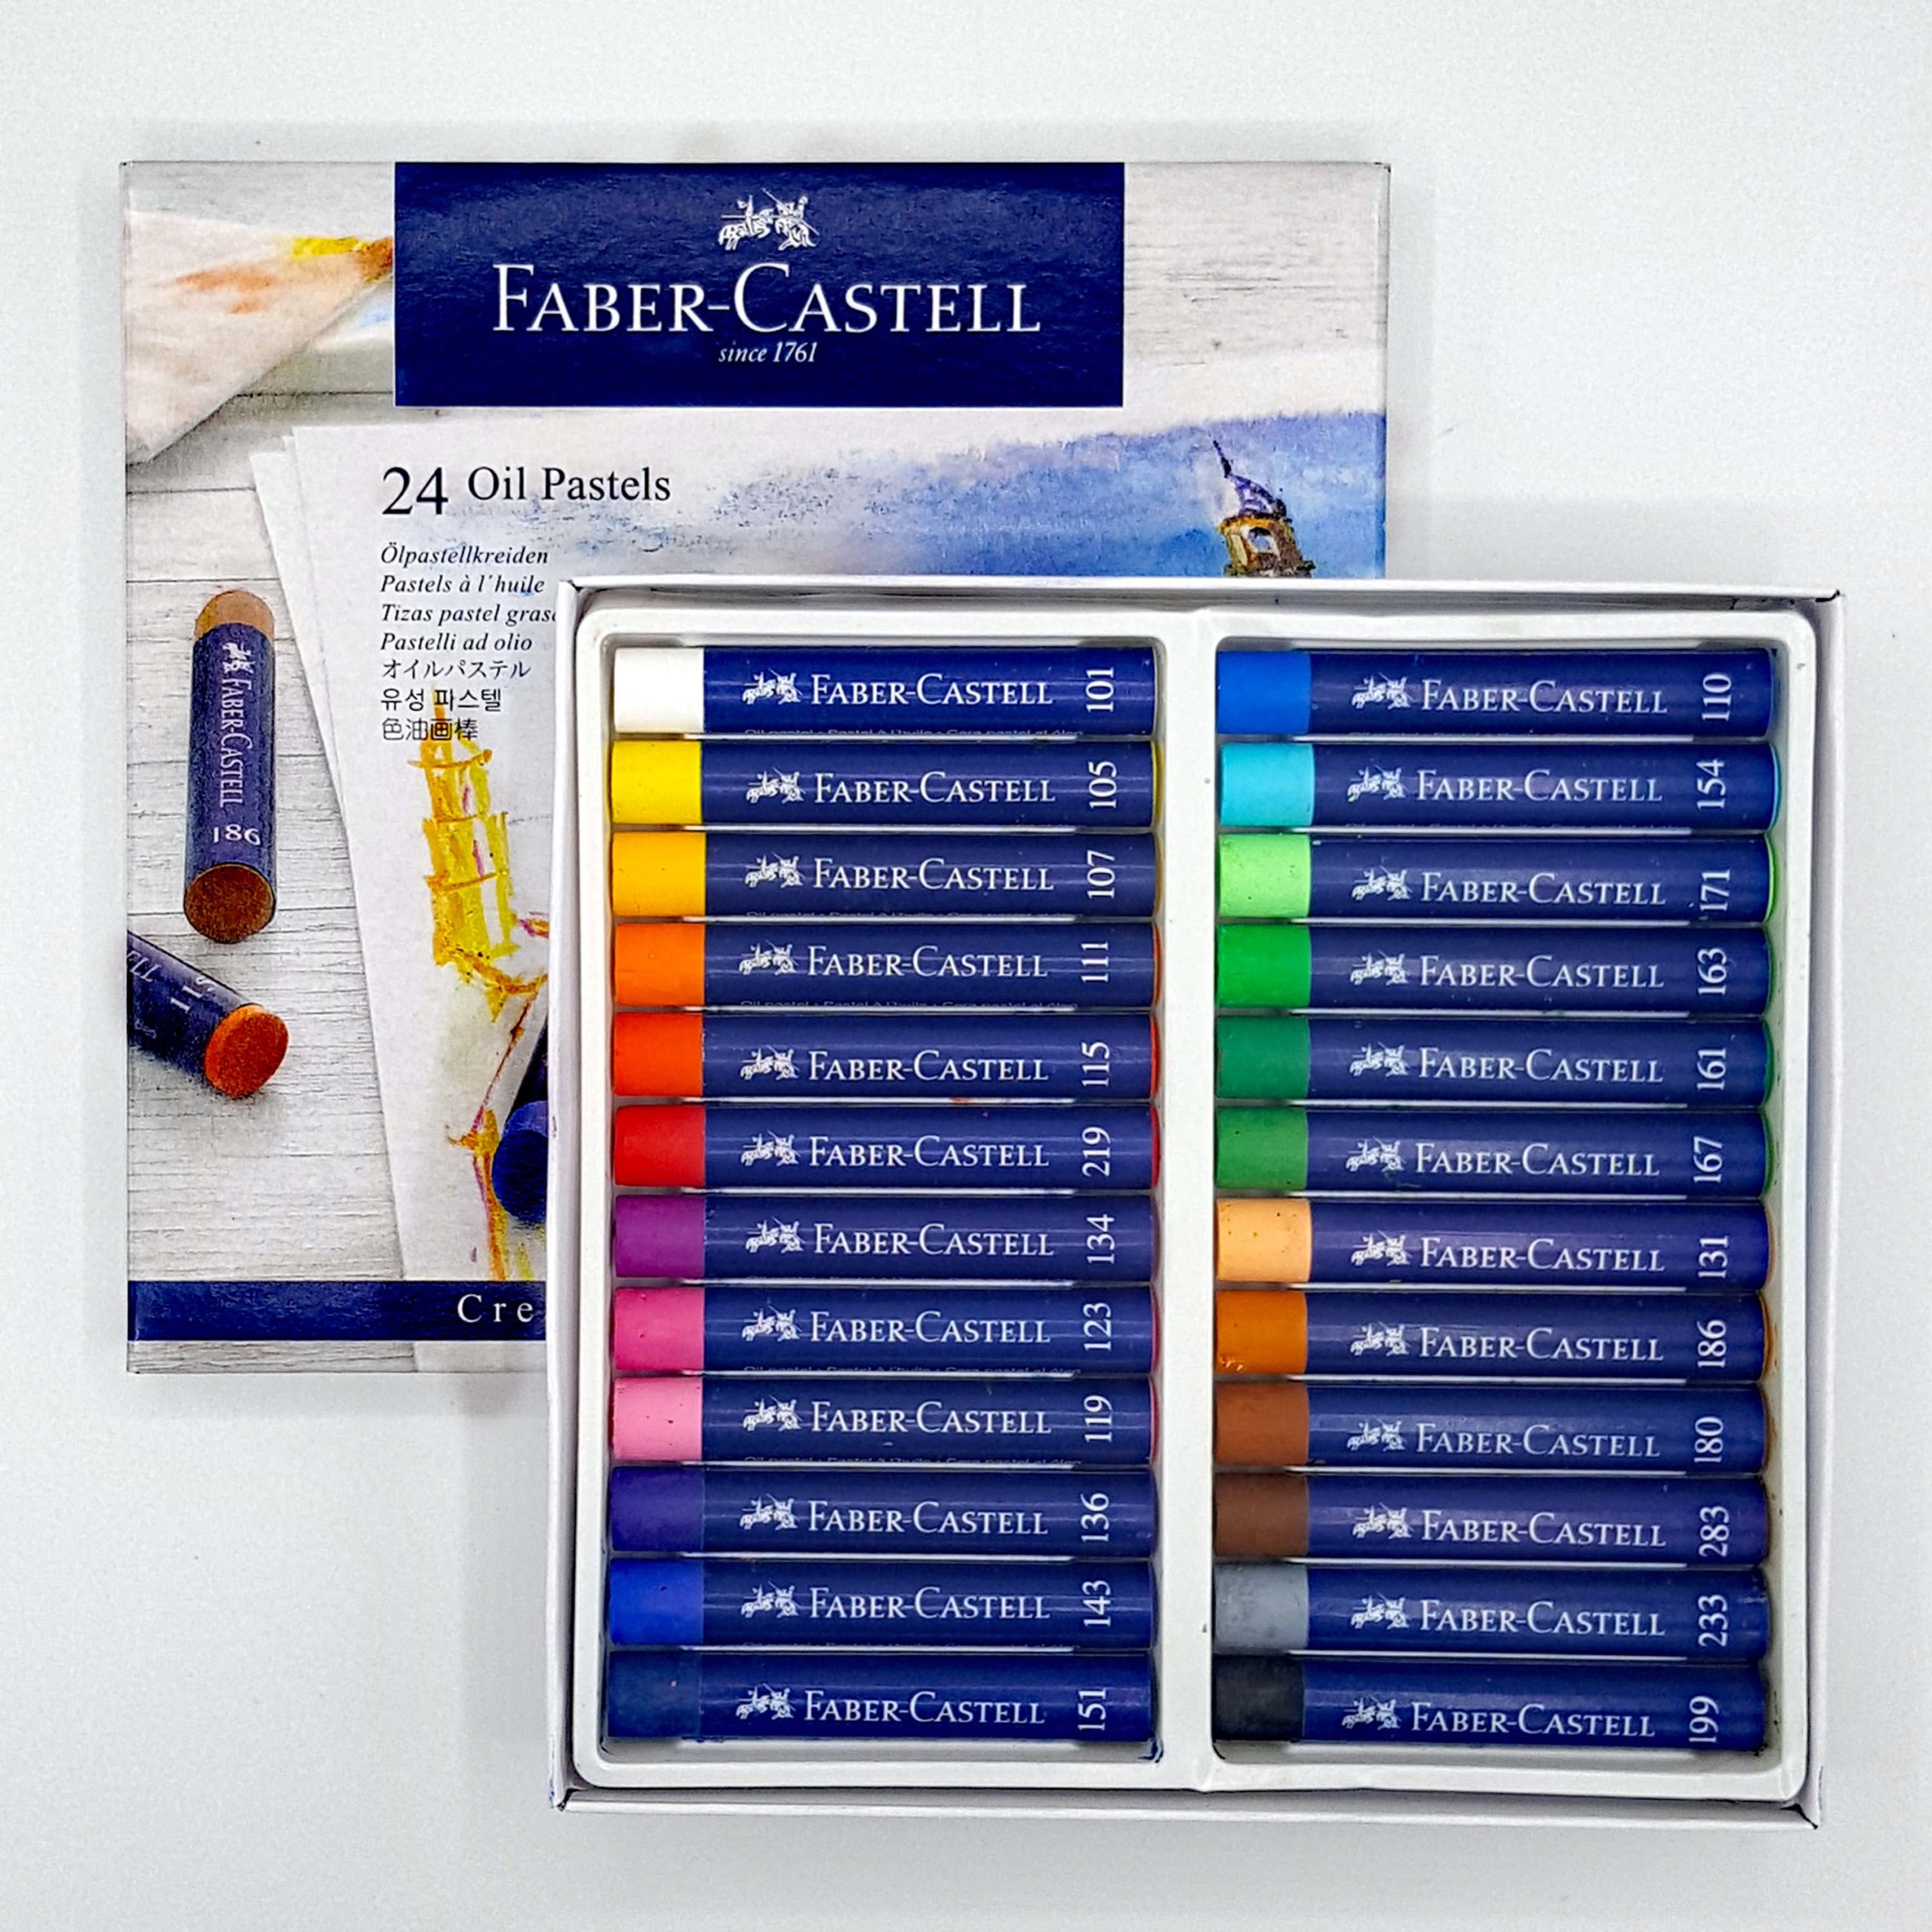 Faber-Castell Oil Pastel Crayons  Oil pastel, Oil pastel crayons